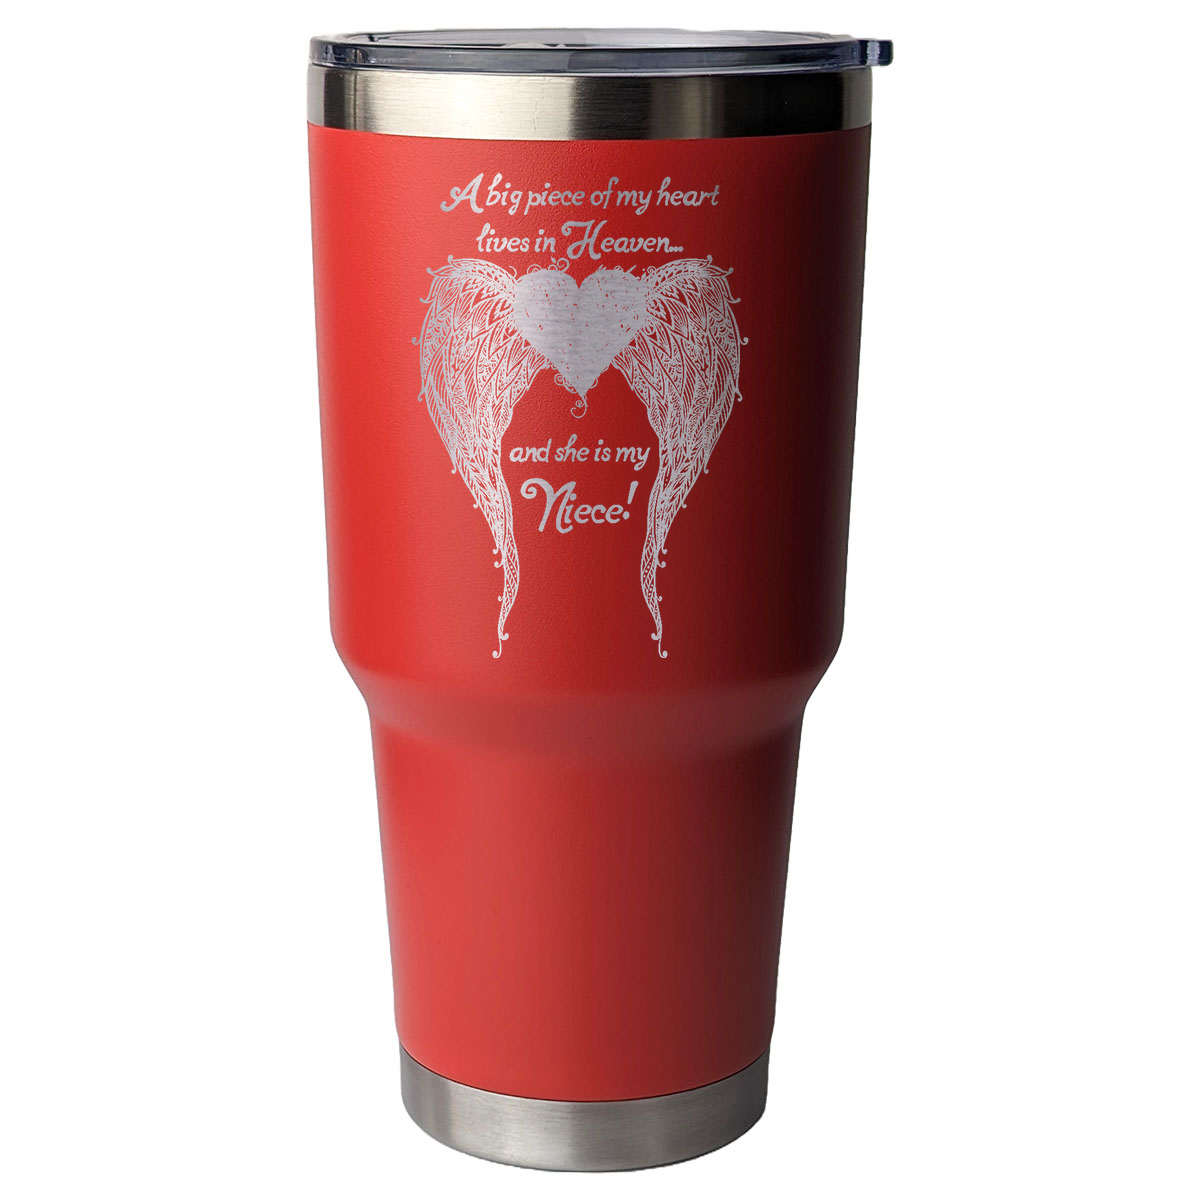 Niece - A Big Piece of my Heart 30 Ounce Laser Etched Tumbler Red